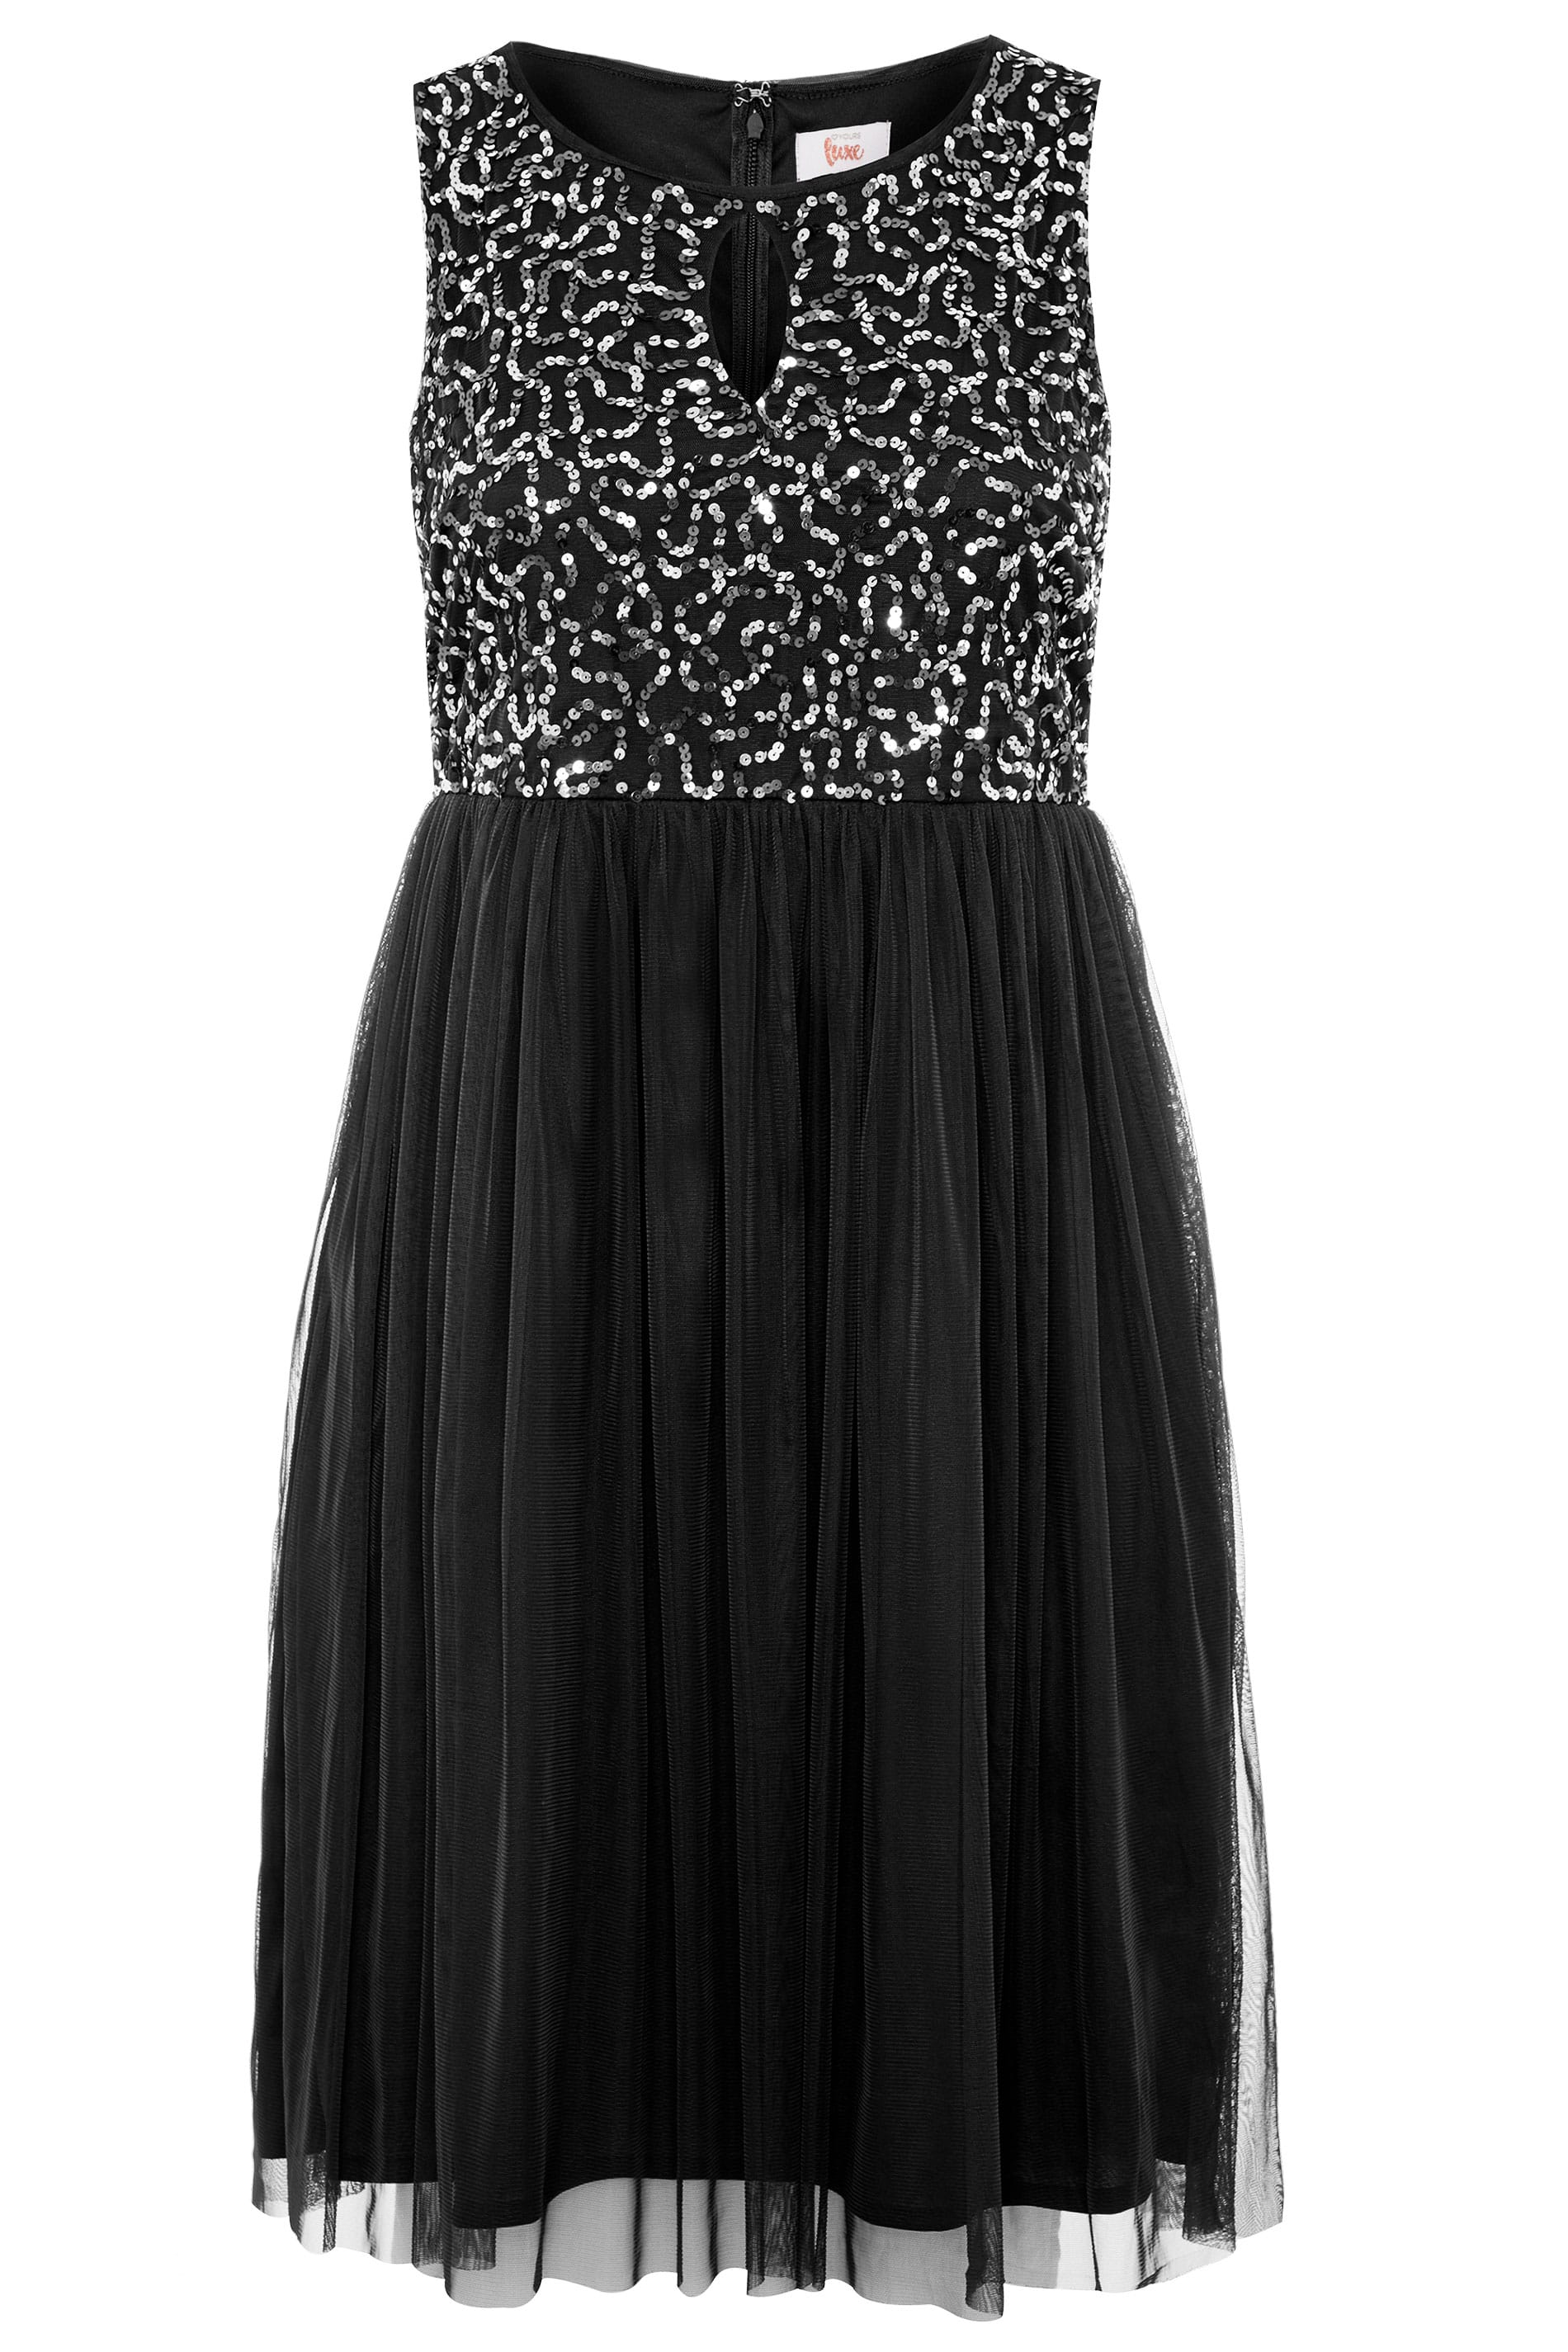 LUXE Black Sequin Embellished Dress | Yours Clothing